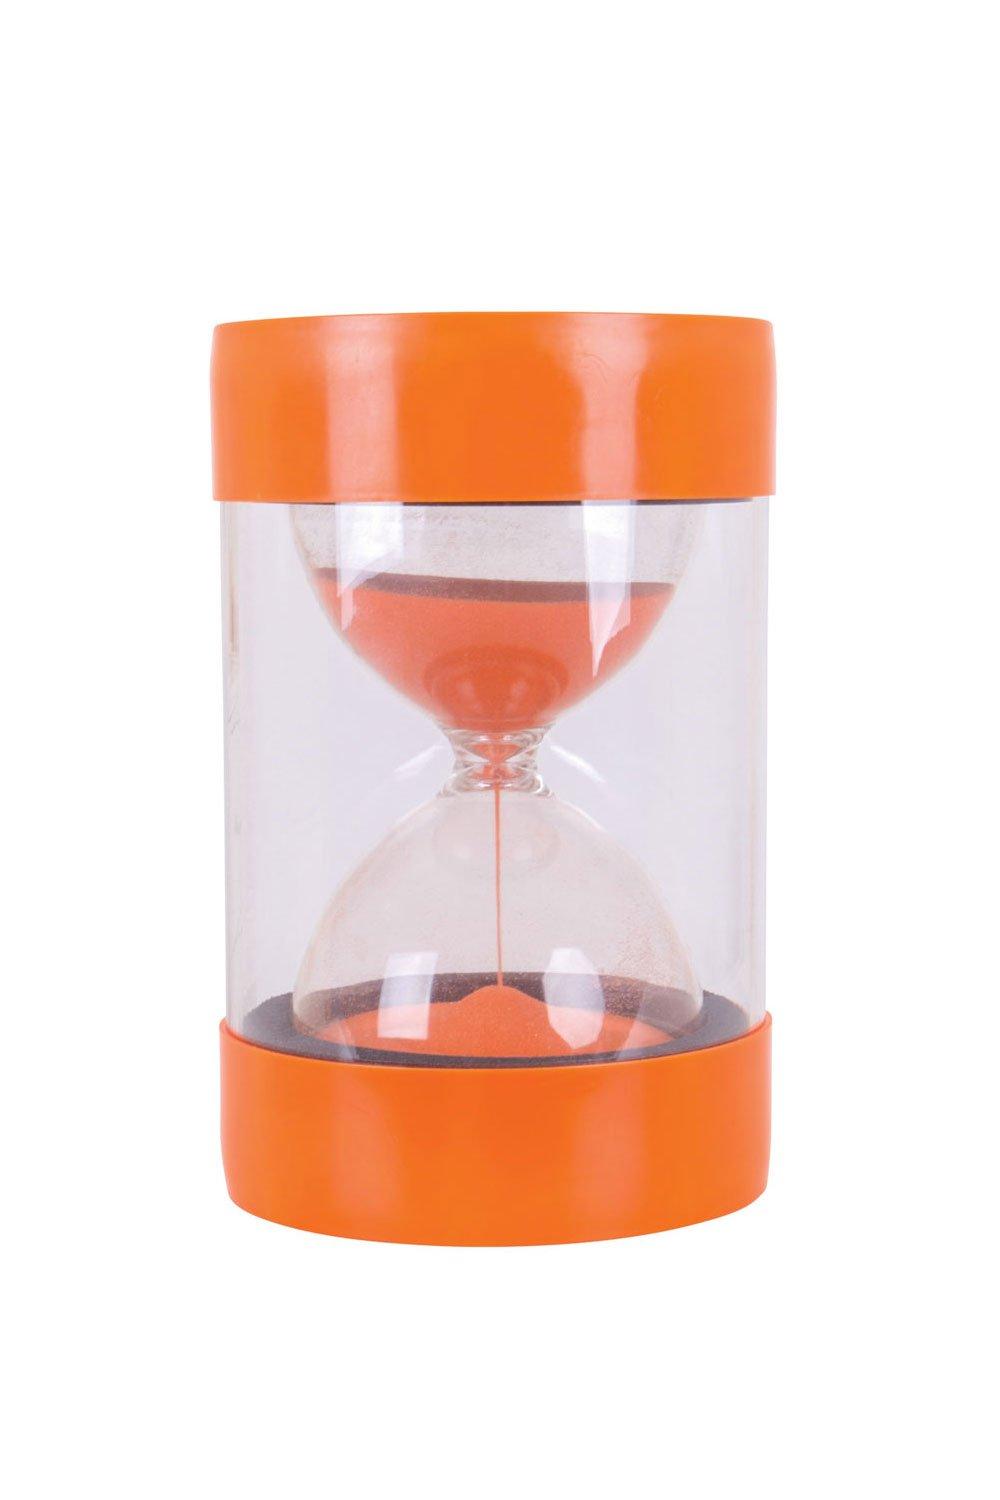 10 Minute’ Site on Sand Timer